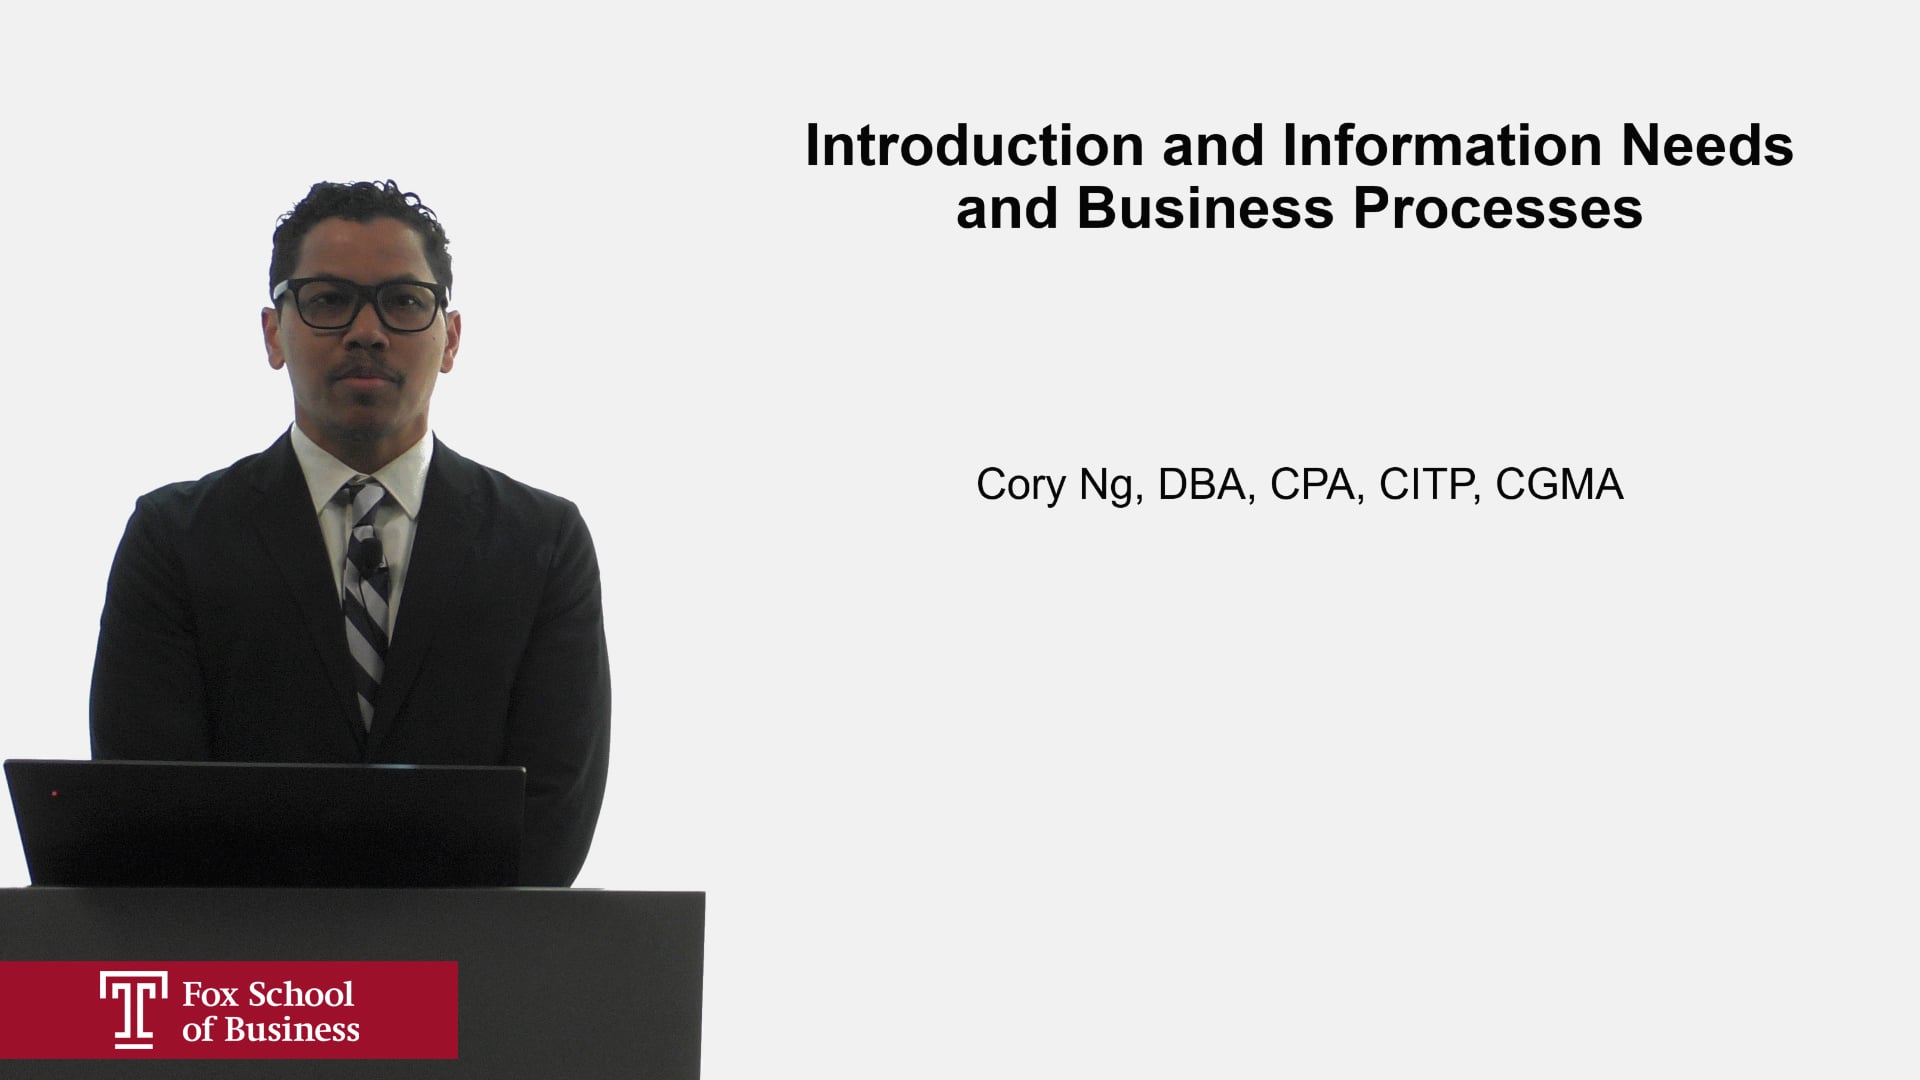 Introduction and Information Needs and Business Processes